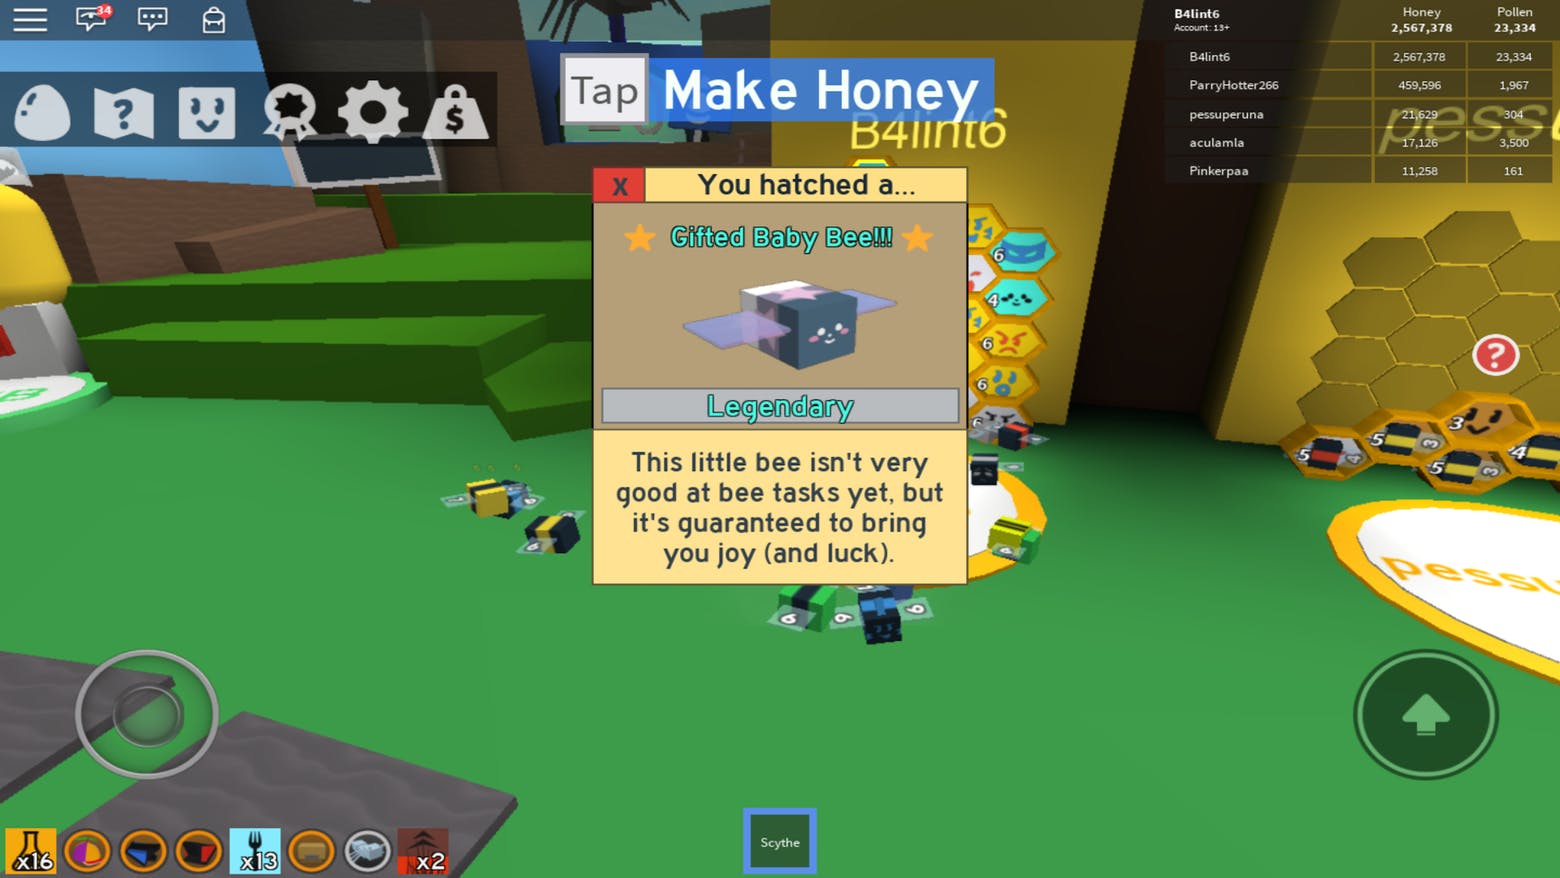 A Roblox game